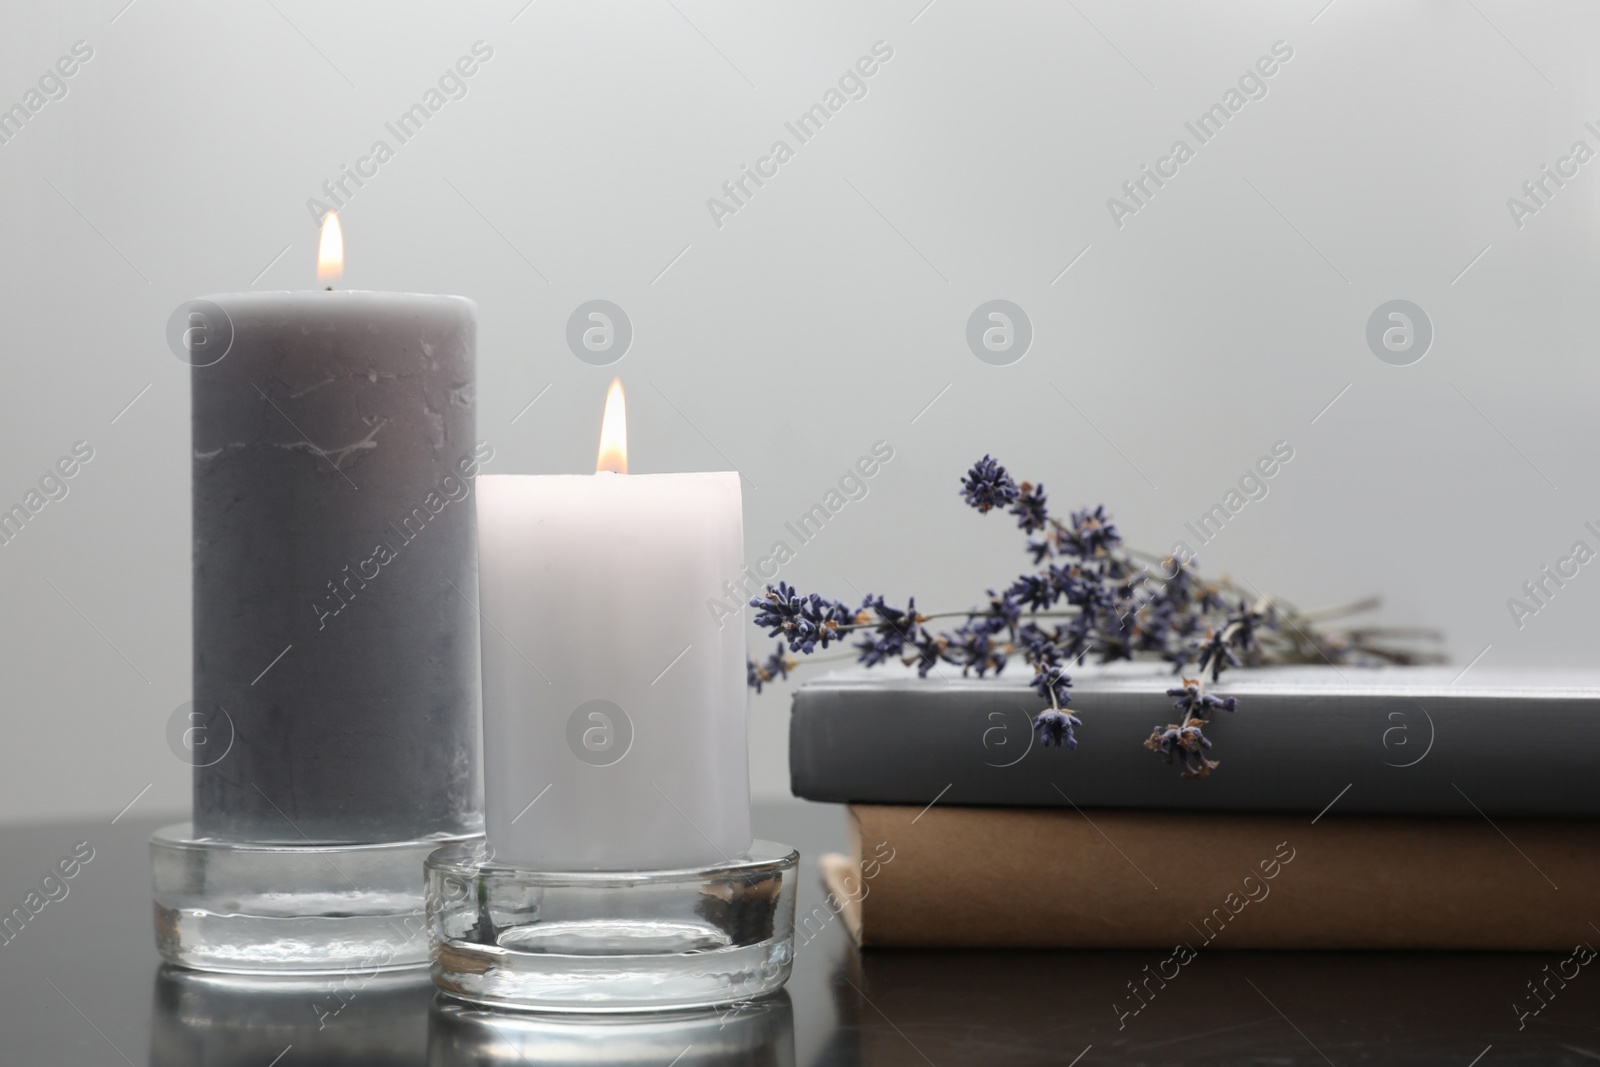 Photo of Wax candles in glass holders near books and lavender flowers on table against light background